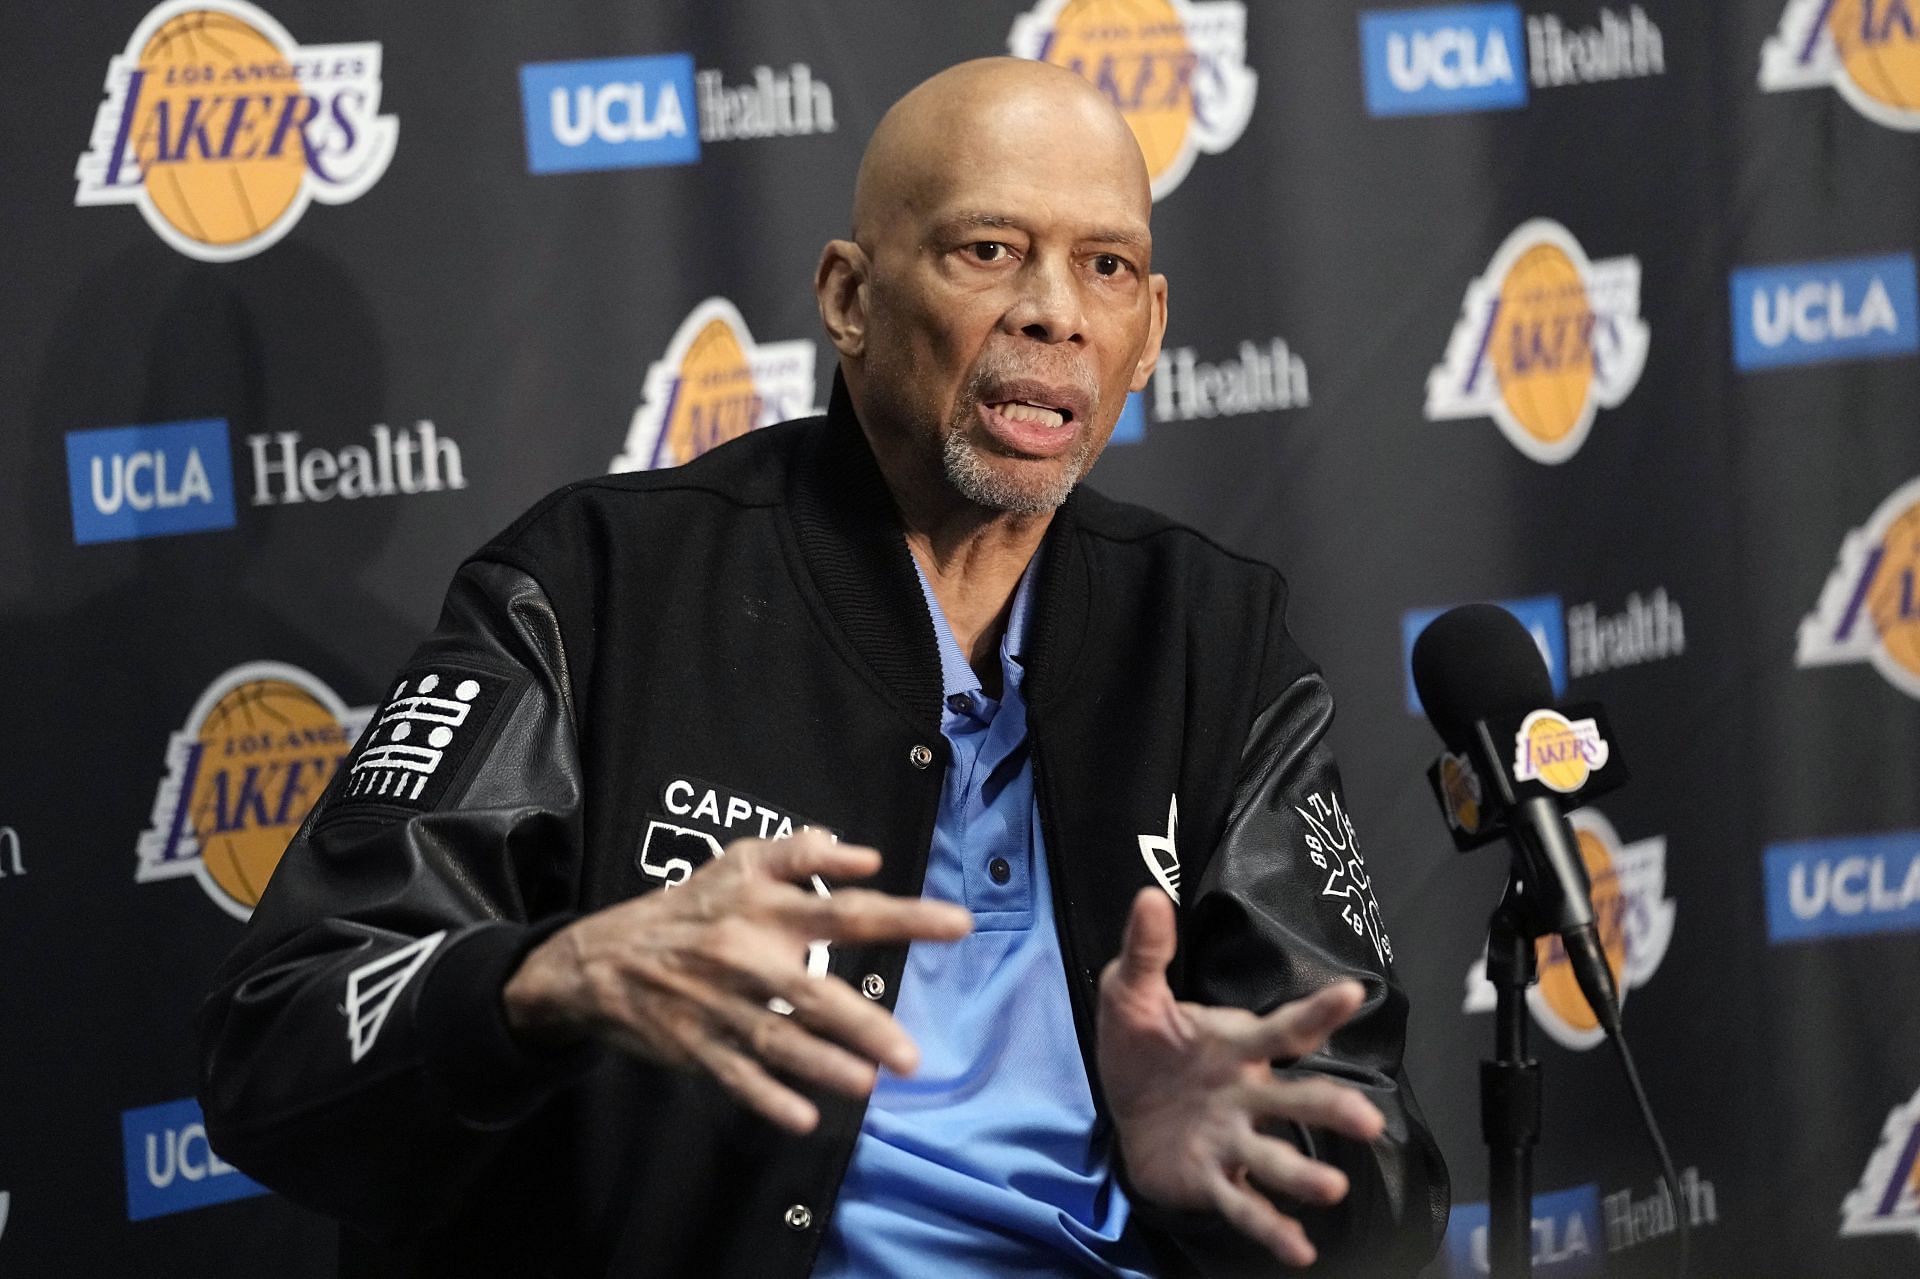 Kareem Abdul-Jabbar is tied for the ninth most career 40-point games in the NBA.